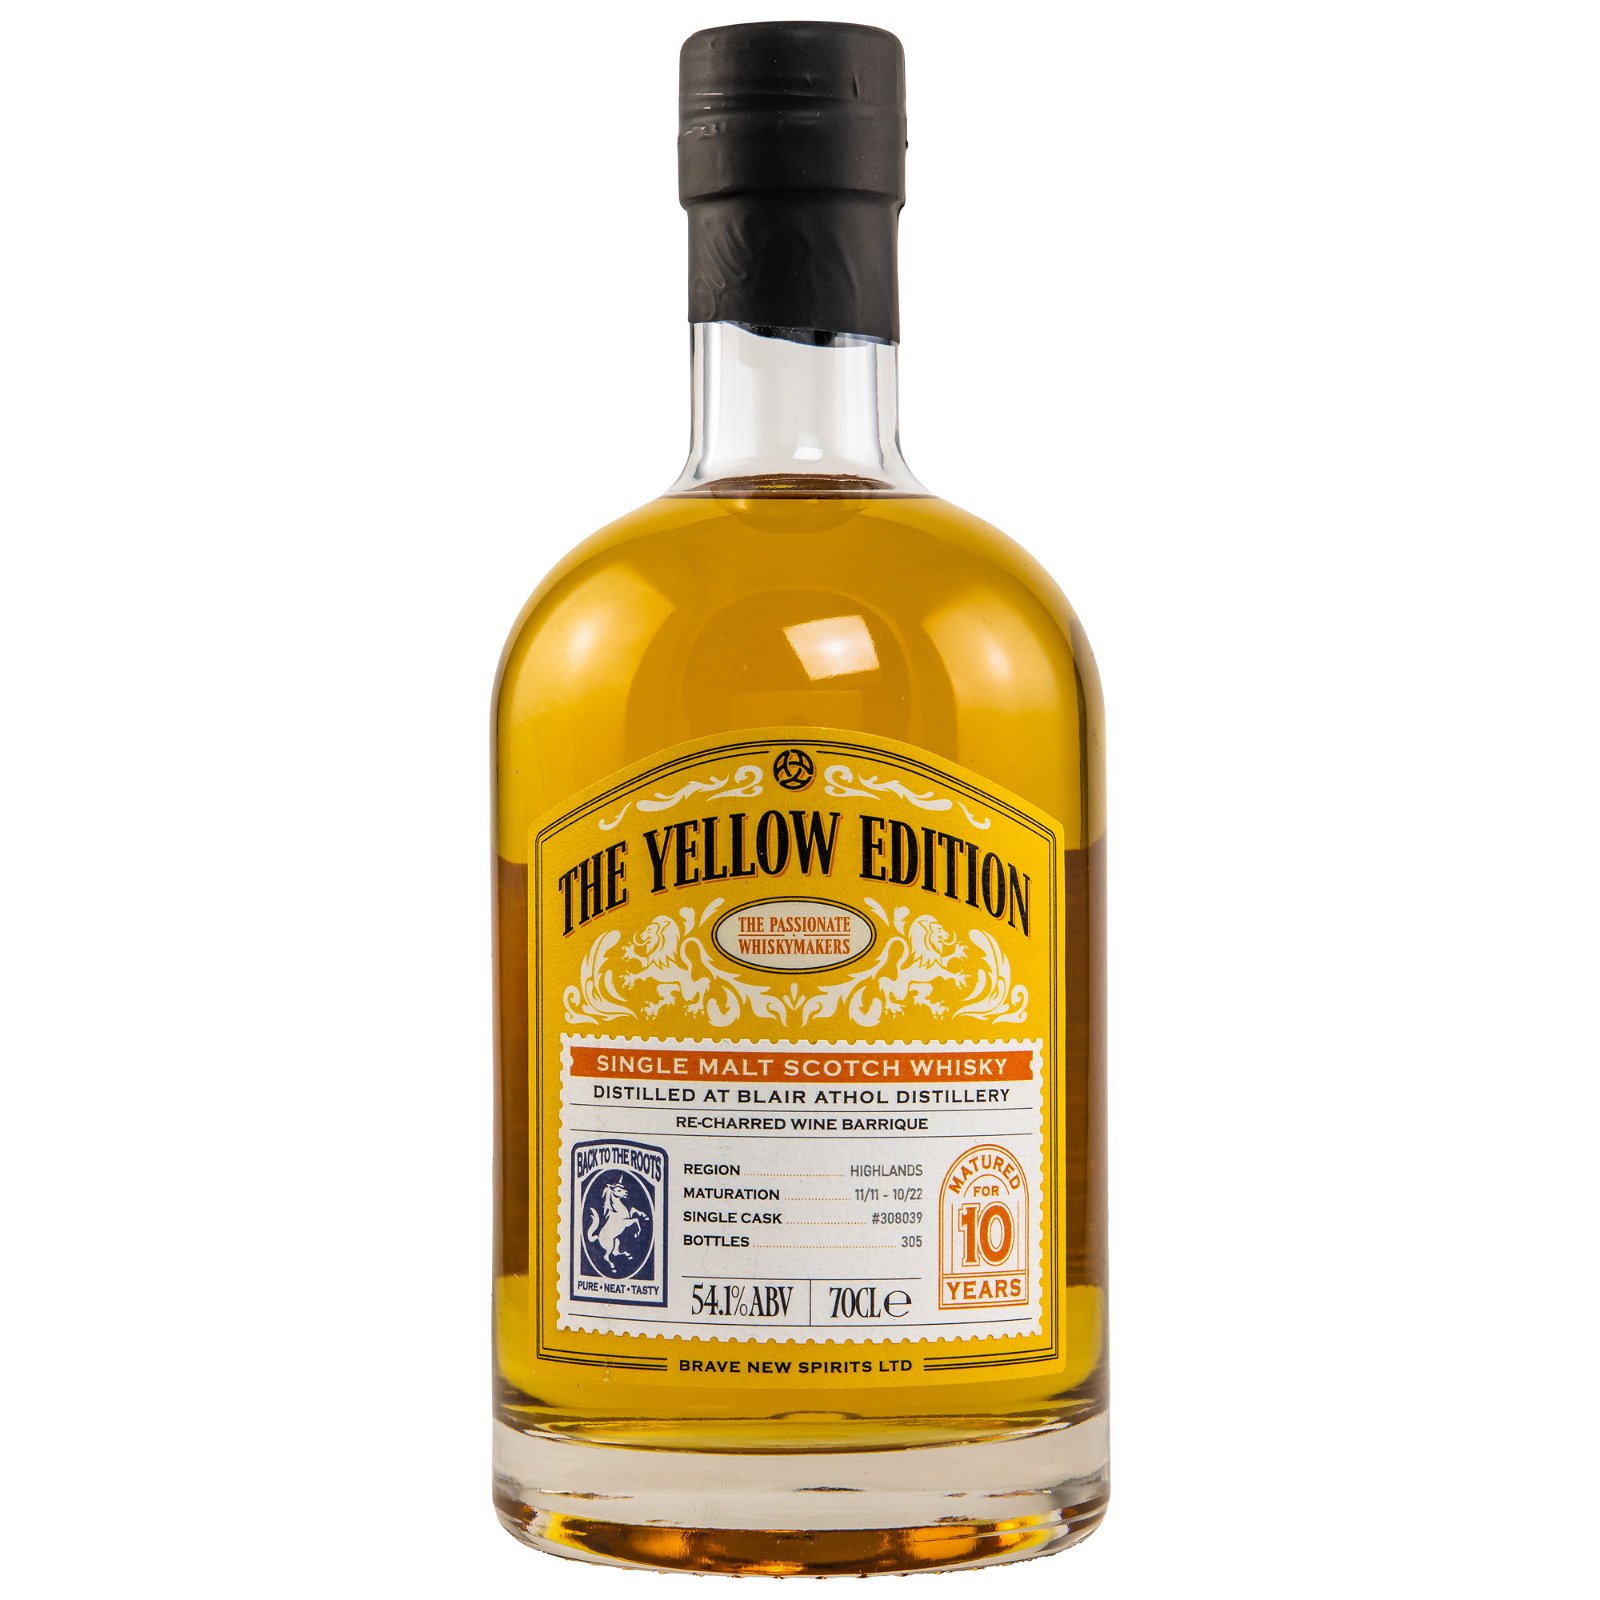 Blair Athol 2011/2022 - 10 Jahre Re-Charred Wine Barrique No. 308039 The Yellow Edition (Brave New Spirits)